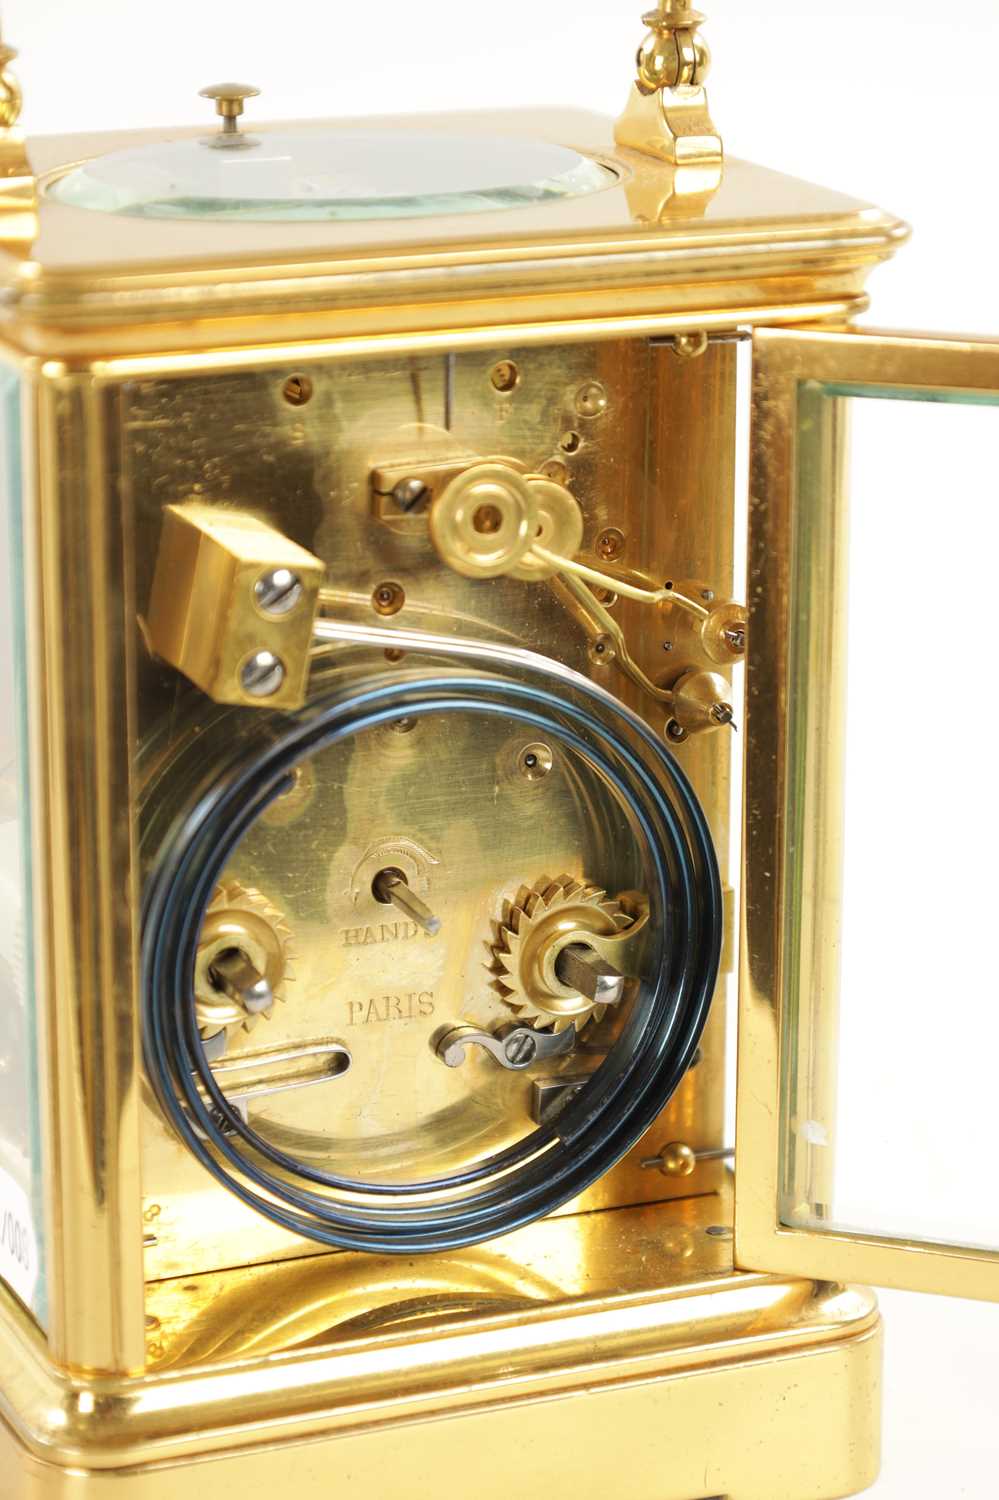 A LATE 19TH CENTURY FRENCH GRAND SONNERIE REPEATING CARRIAGE CLOCK - Image 8 of 8